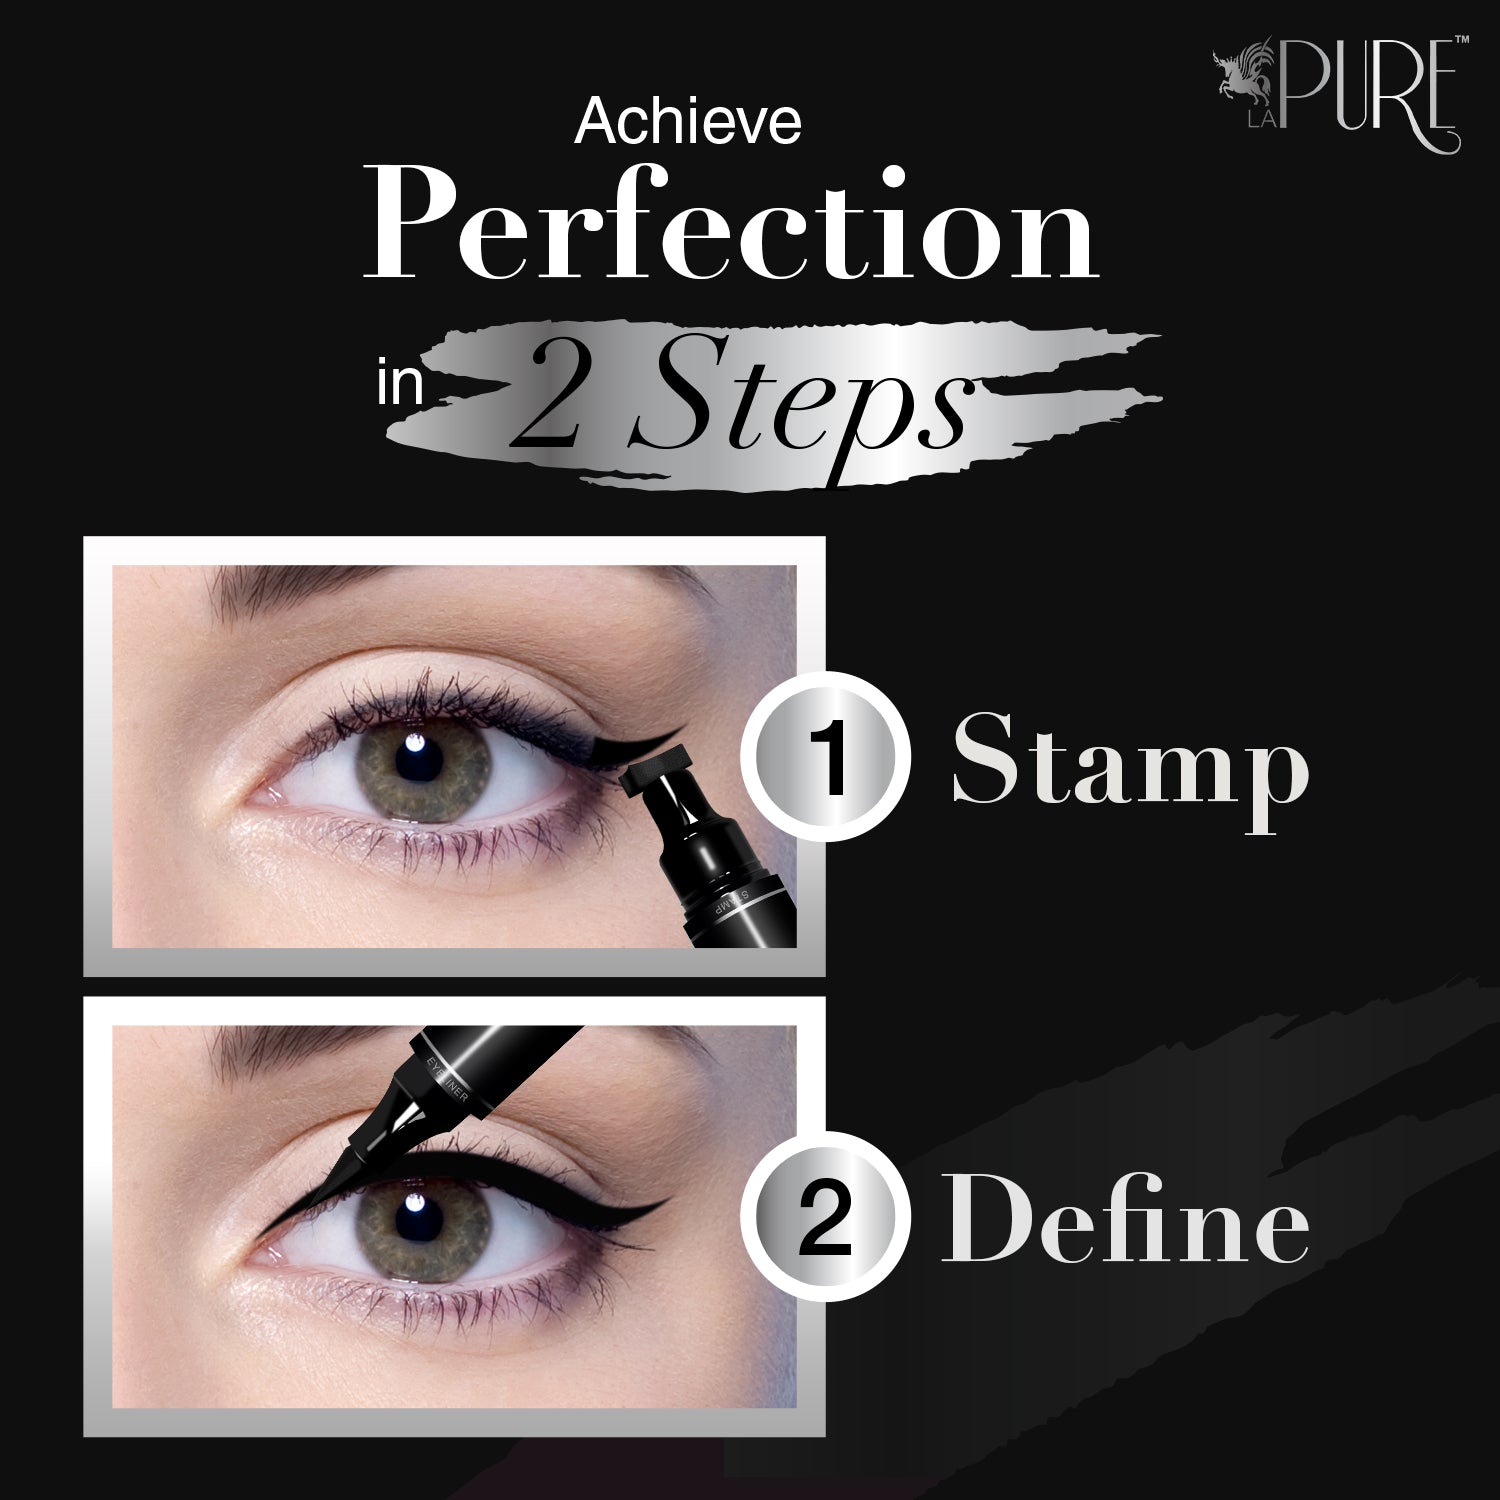 Achieve perfection in 2 steps